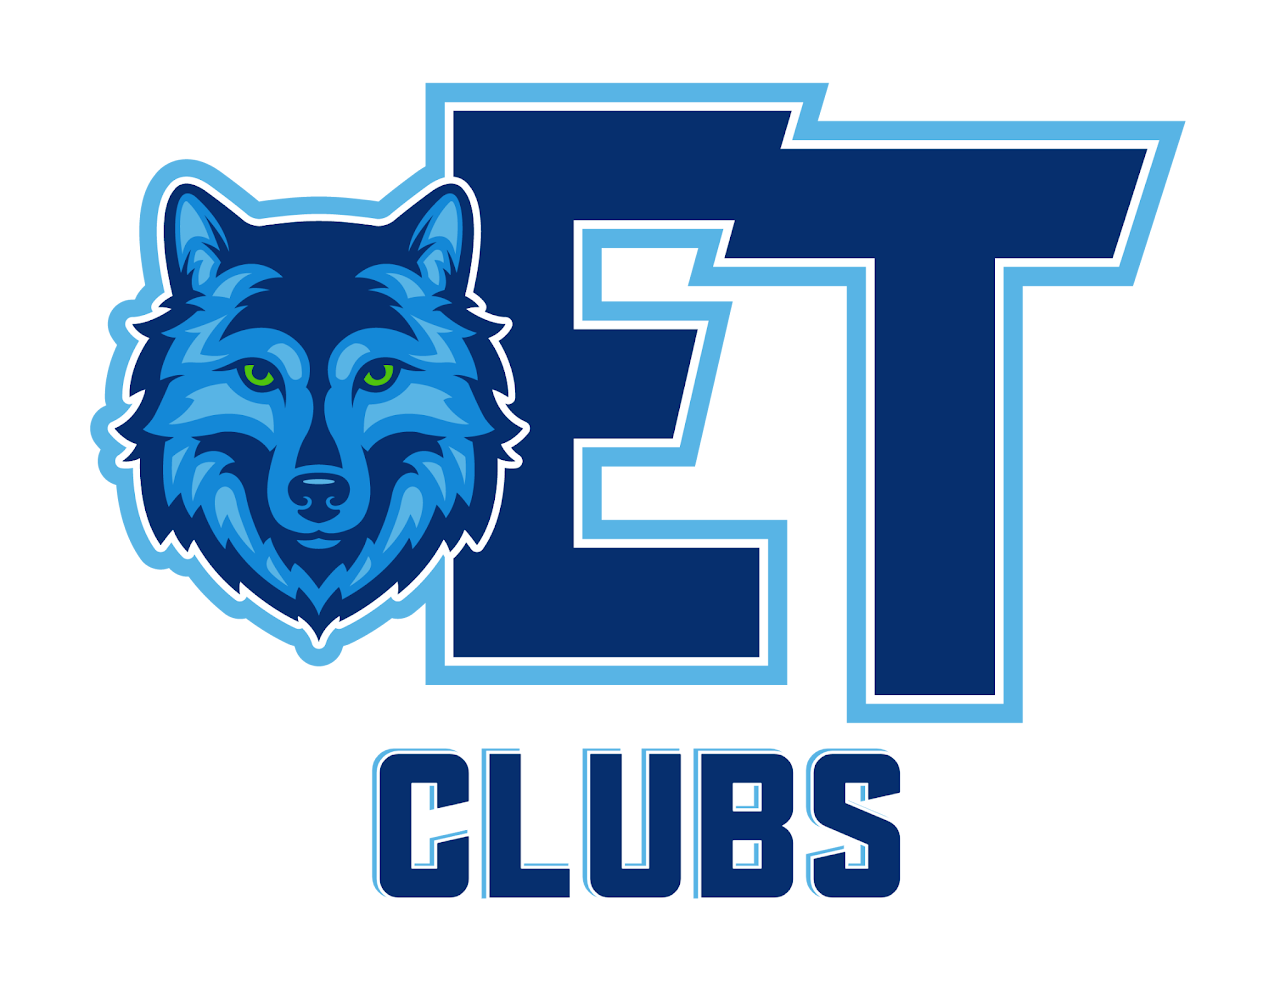 This image features a graphic logo for the "ET Club" which is identified by a wolf's head and the text "ET Clubs" beneath it